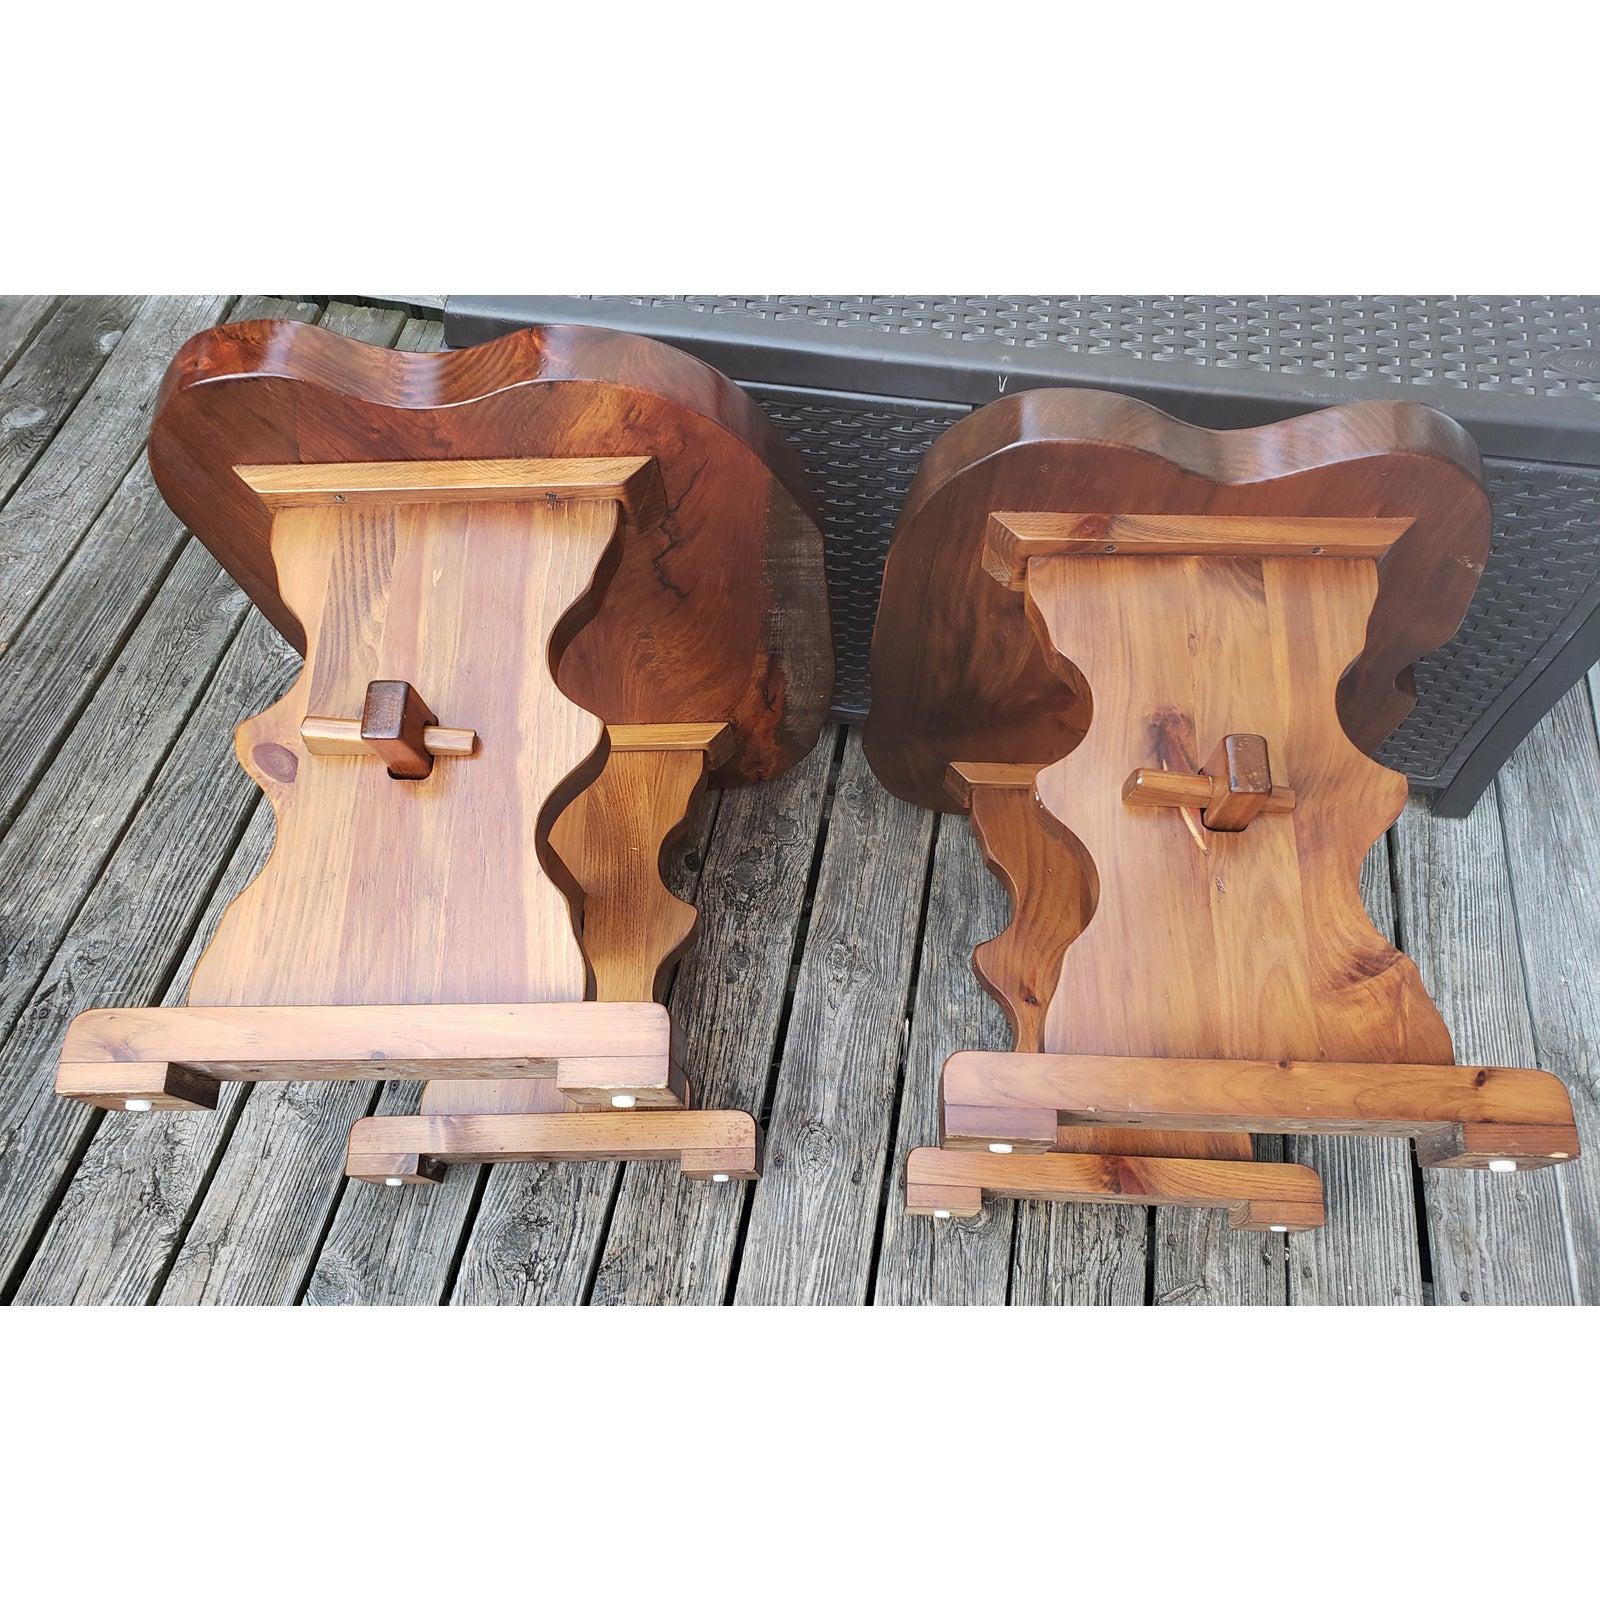 1980s Handcrafted Polished Walnut Pine Wood Slabs Trestle Side Tables, a Pair For Sale 1